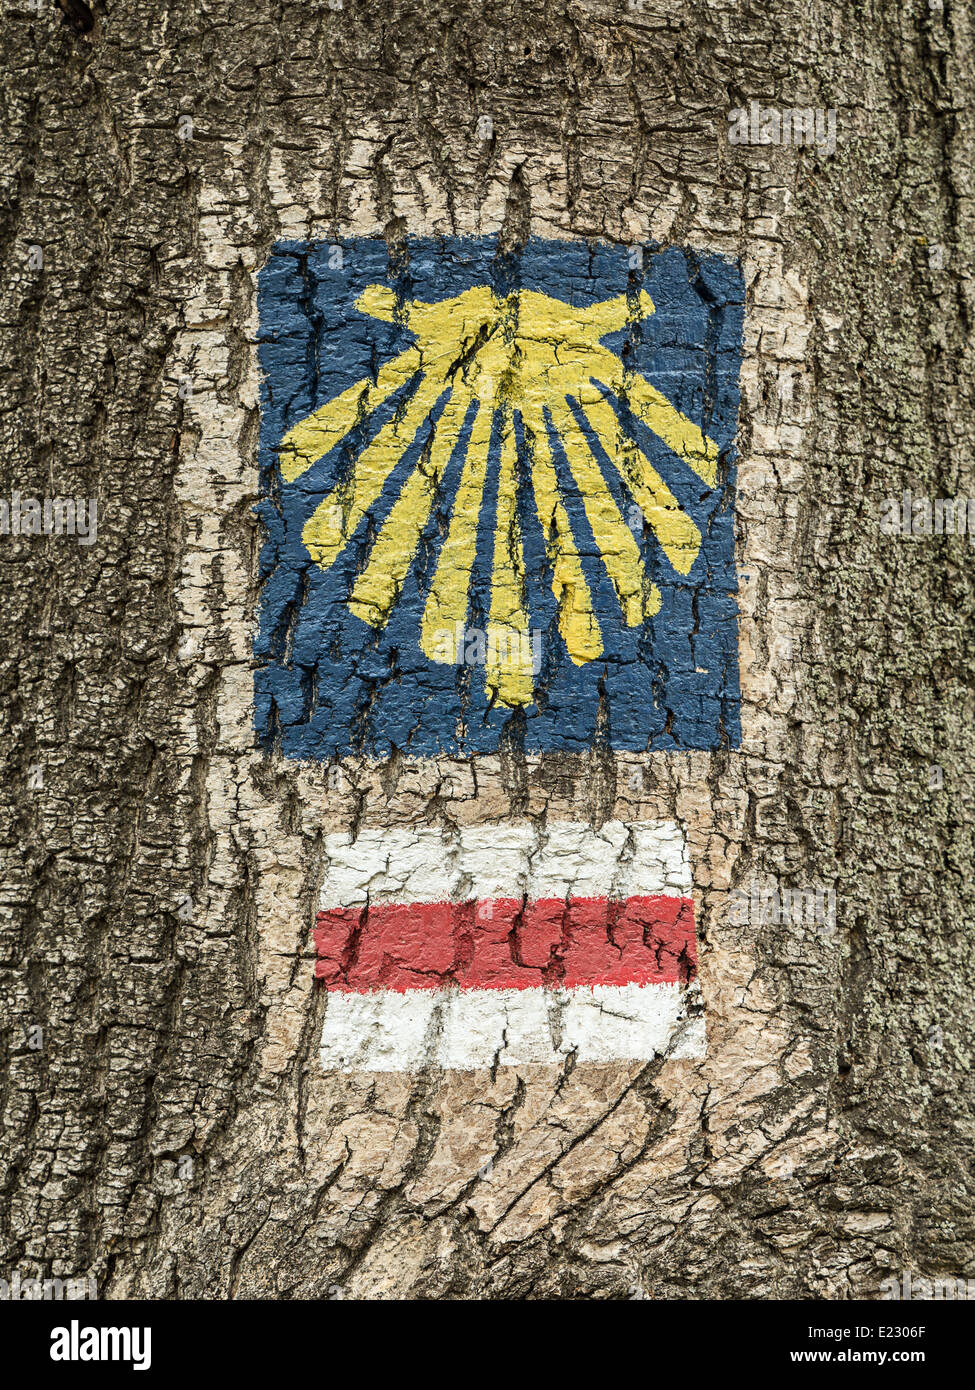 Sign of Saint James route painted on tree bark Stock Photo